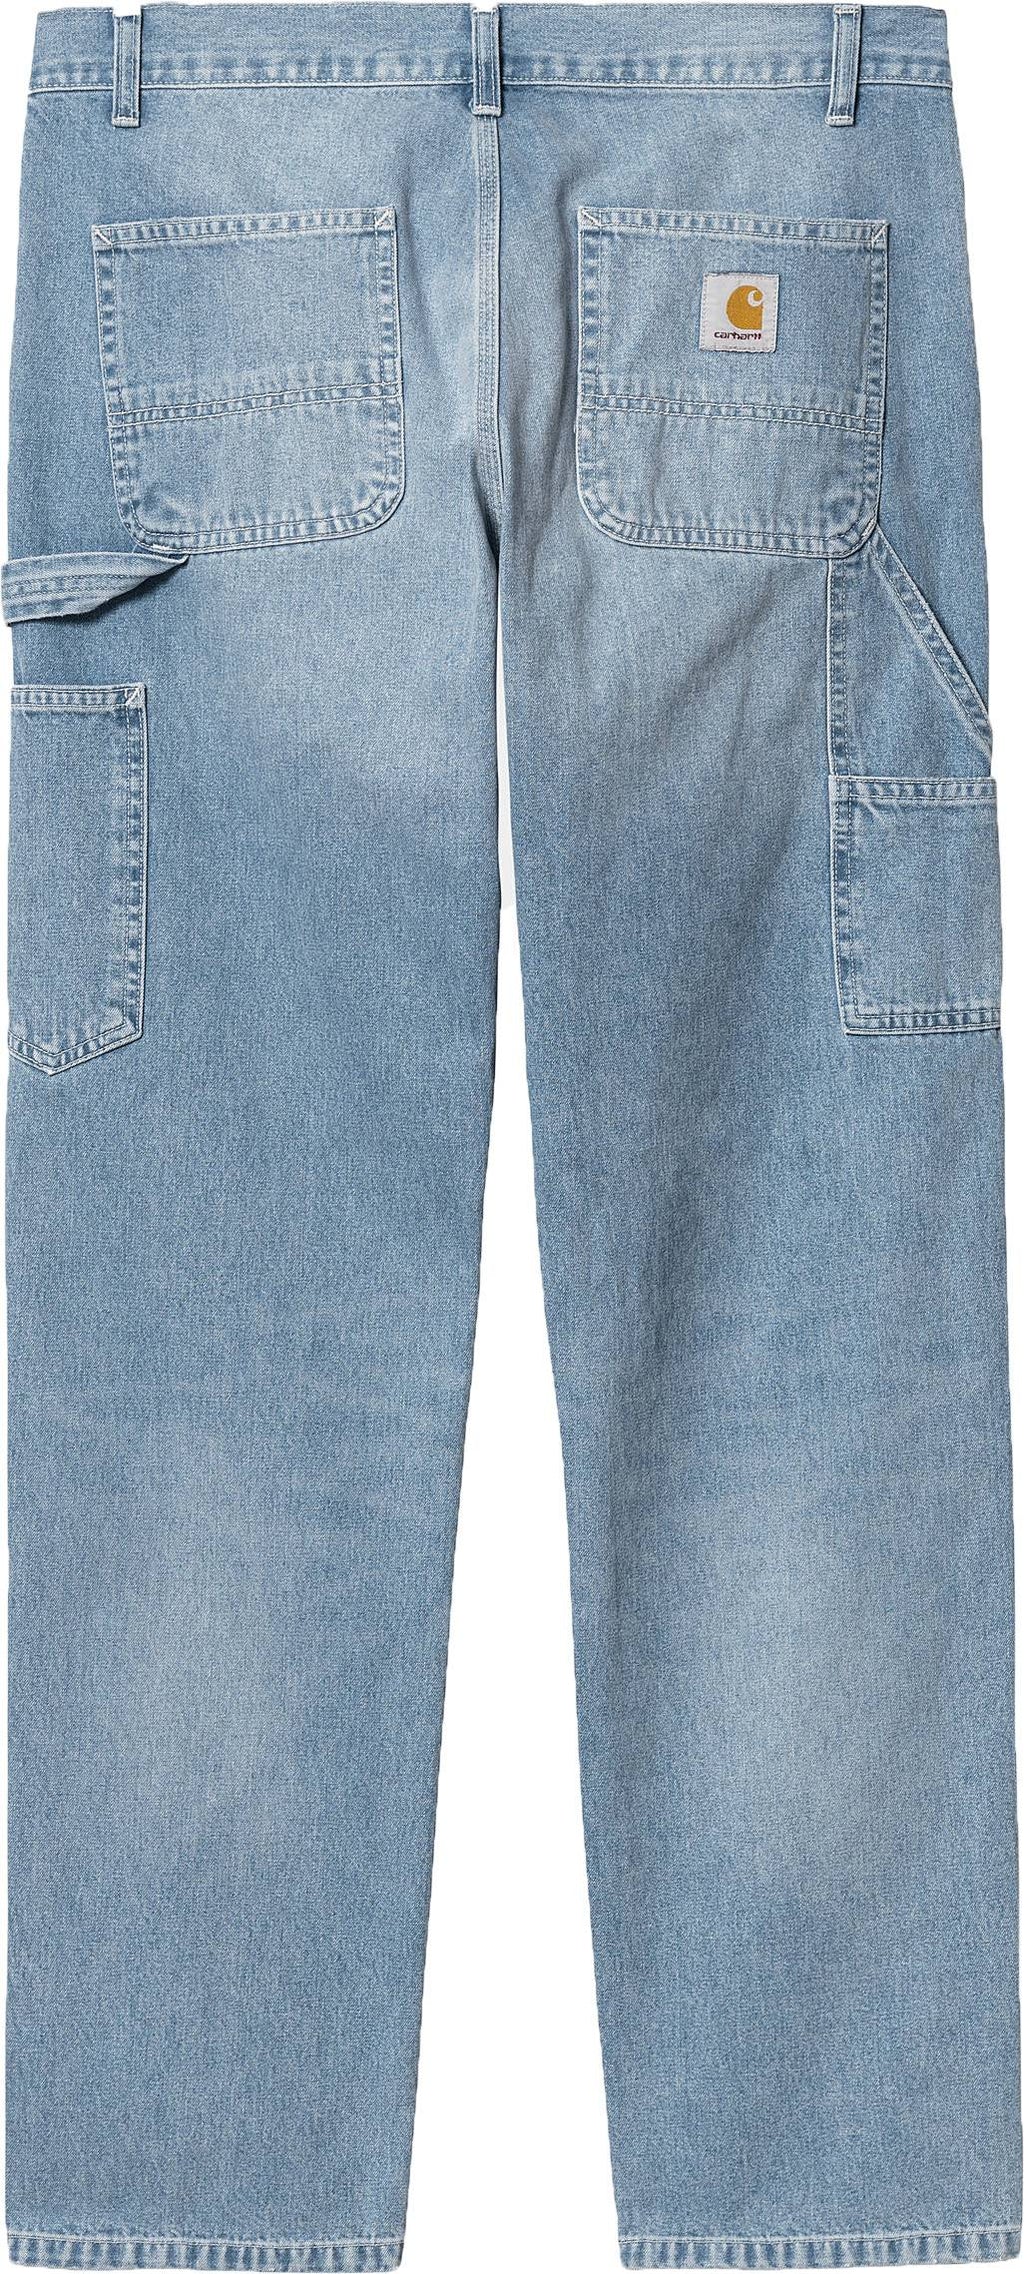  Carhartt Wip Jeans Ruck Single Knee Pant Blue Light True Washed Uomo - 1